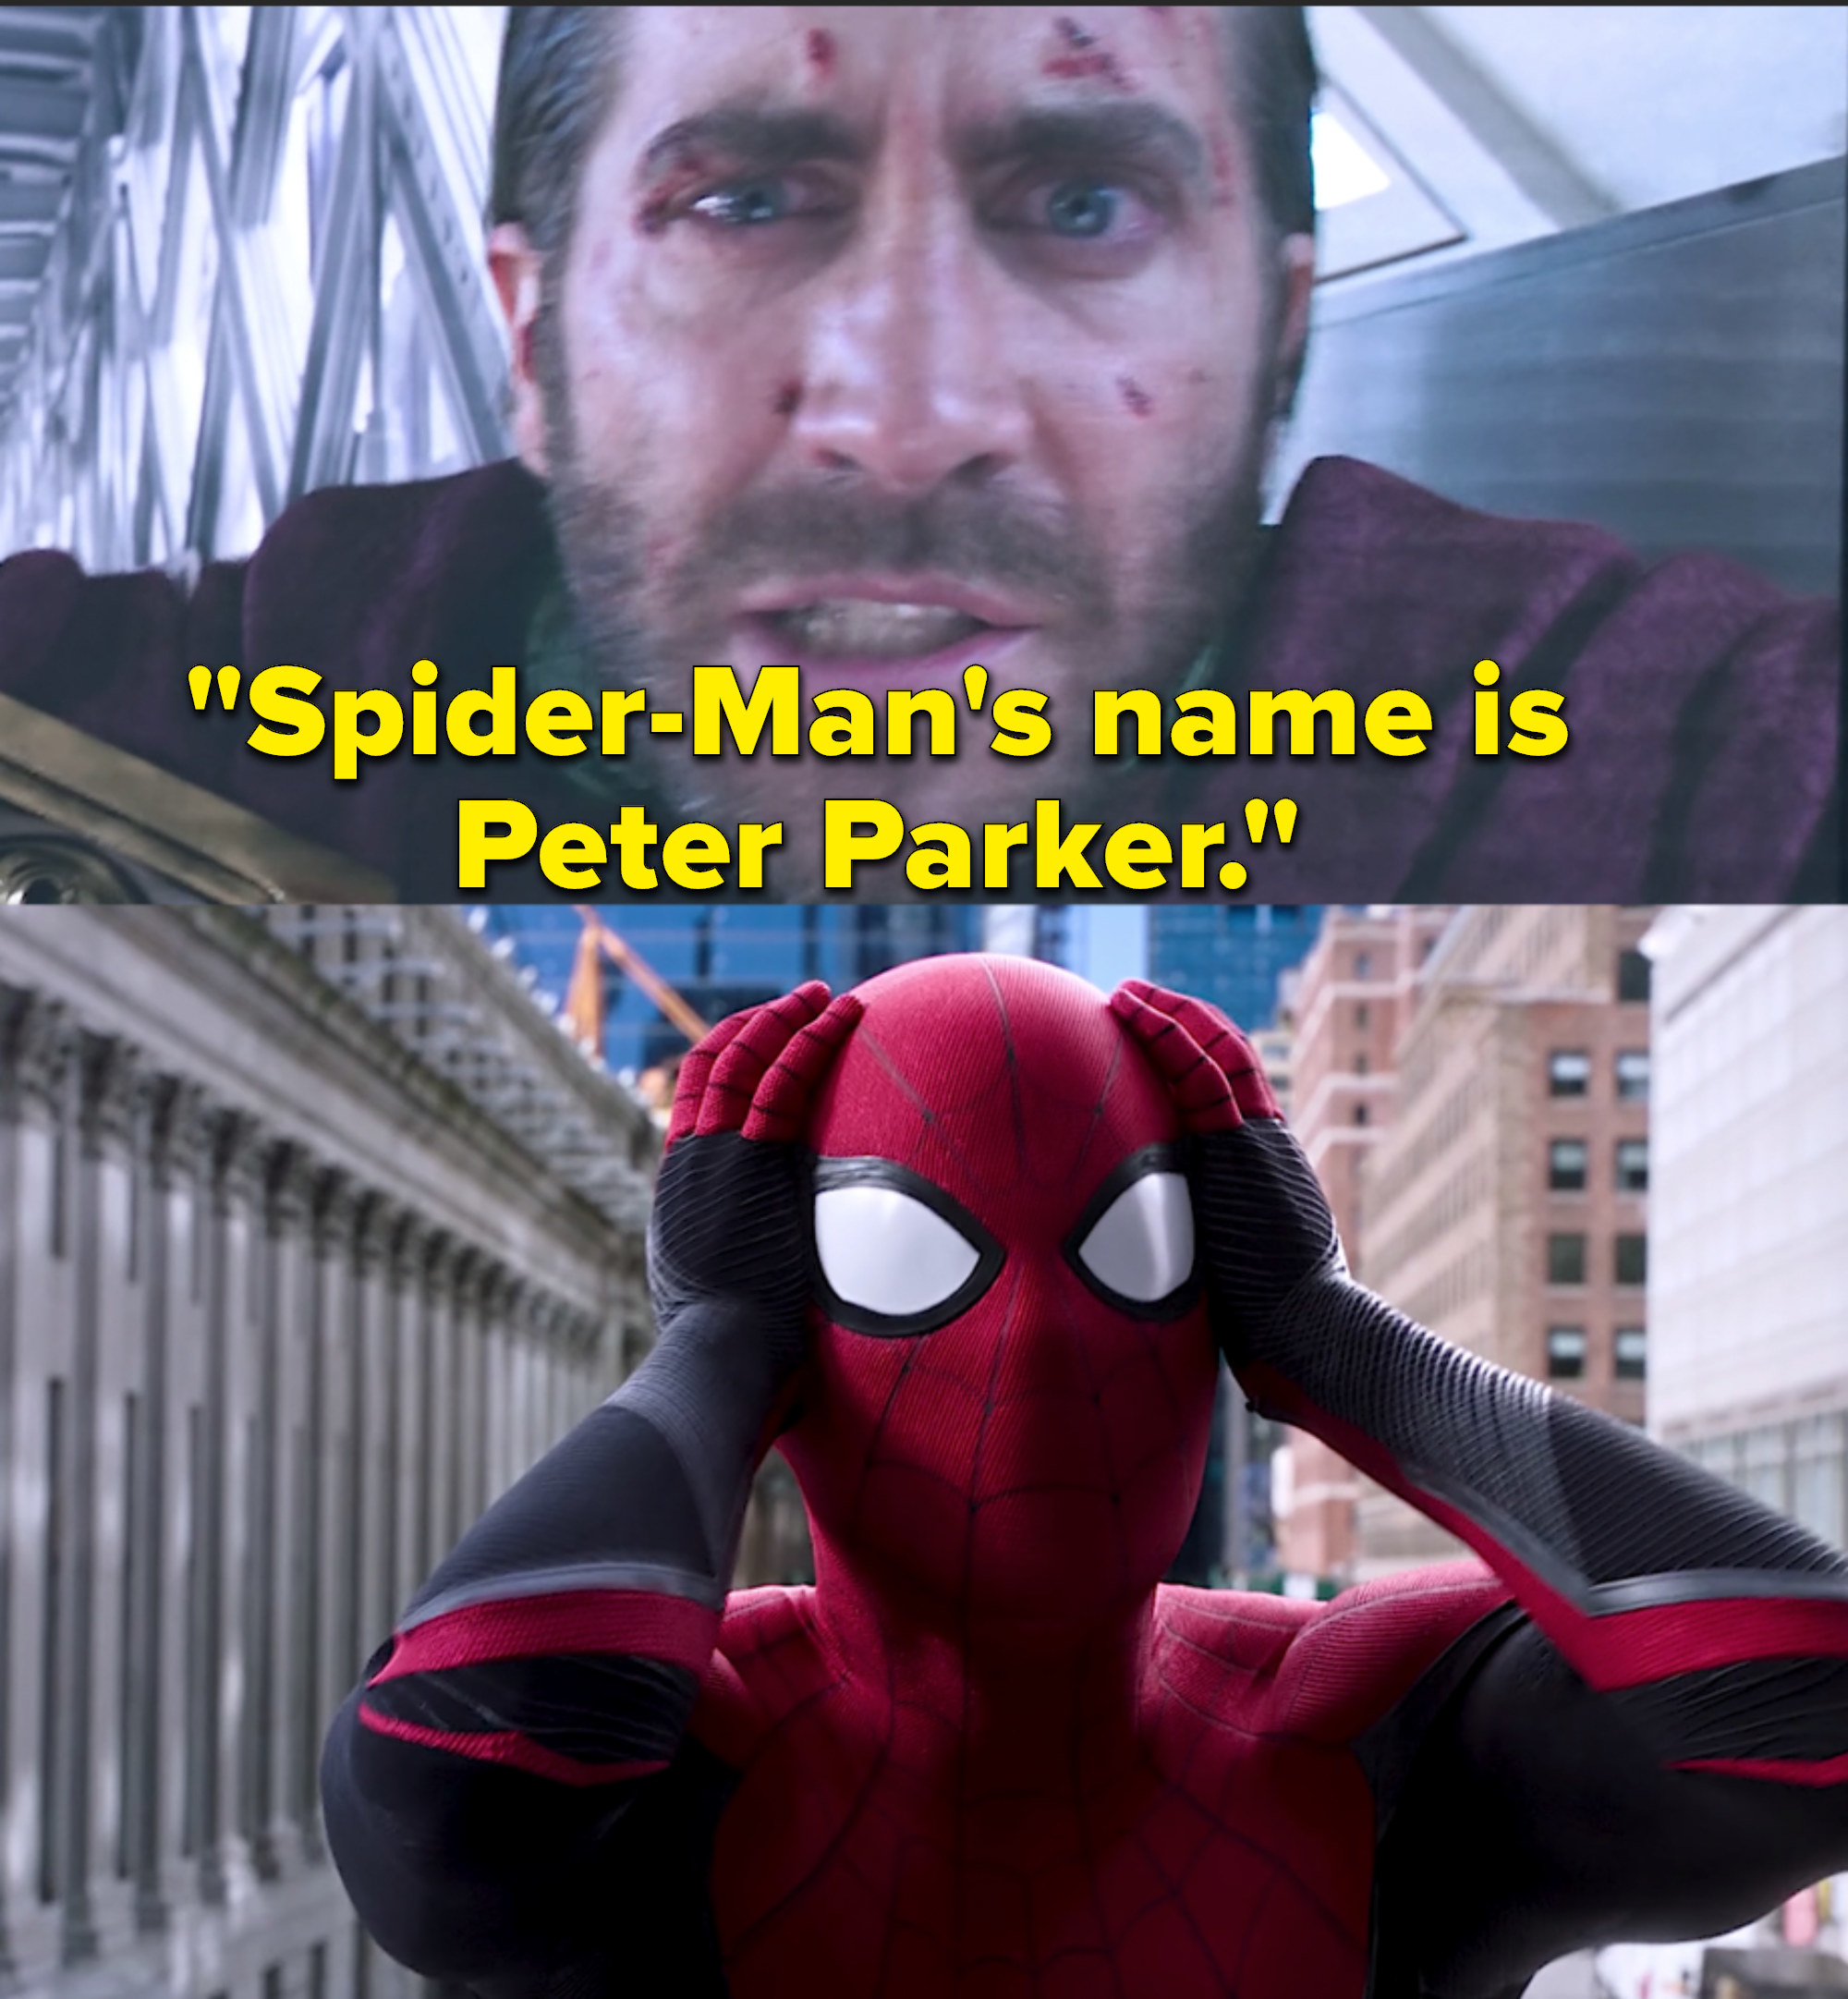 Tom Holland as Peter Parker / Spider-Man and Jake Gyllenhaal as Quentin Beck / Mysterio in the movie &quot;Spider-Man: Far From Home.&quot;